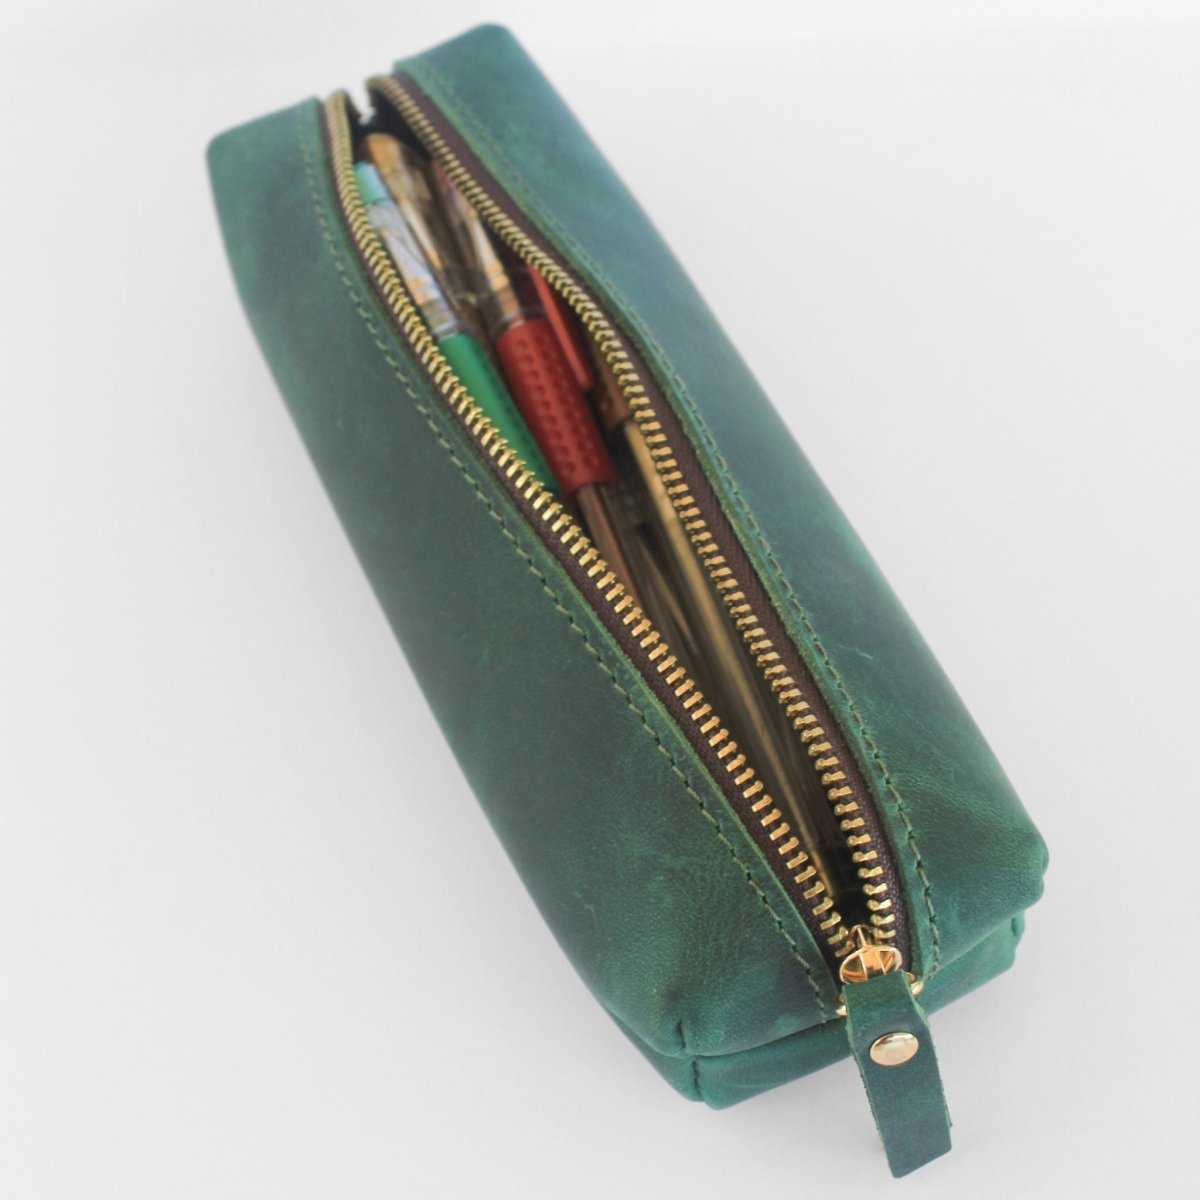 open leather pencil case with pens inside